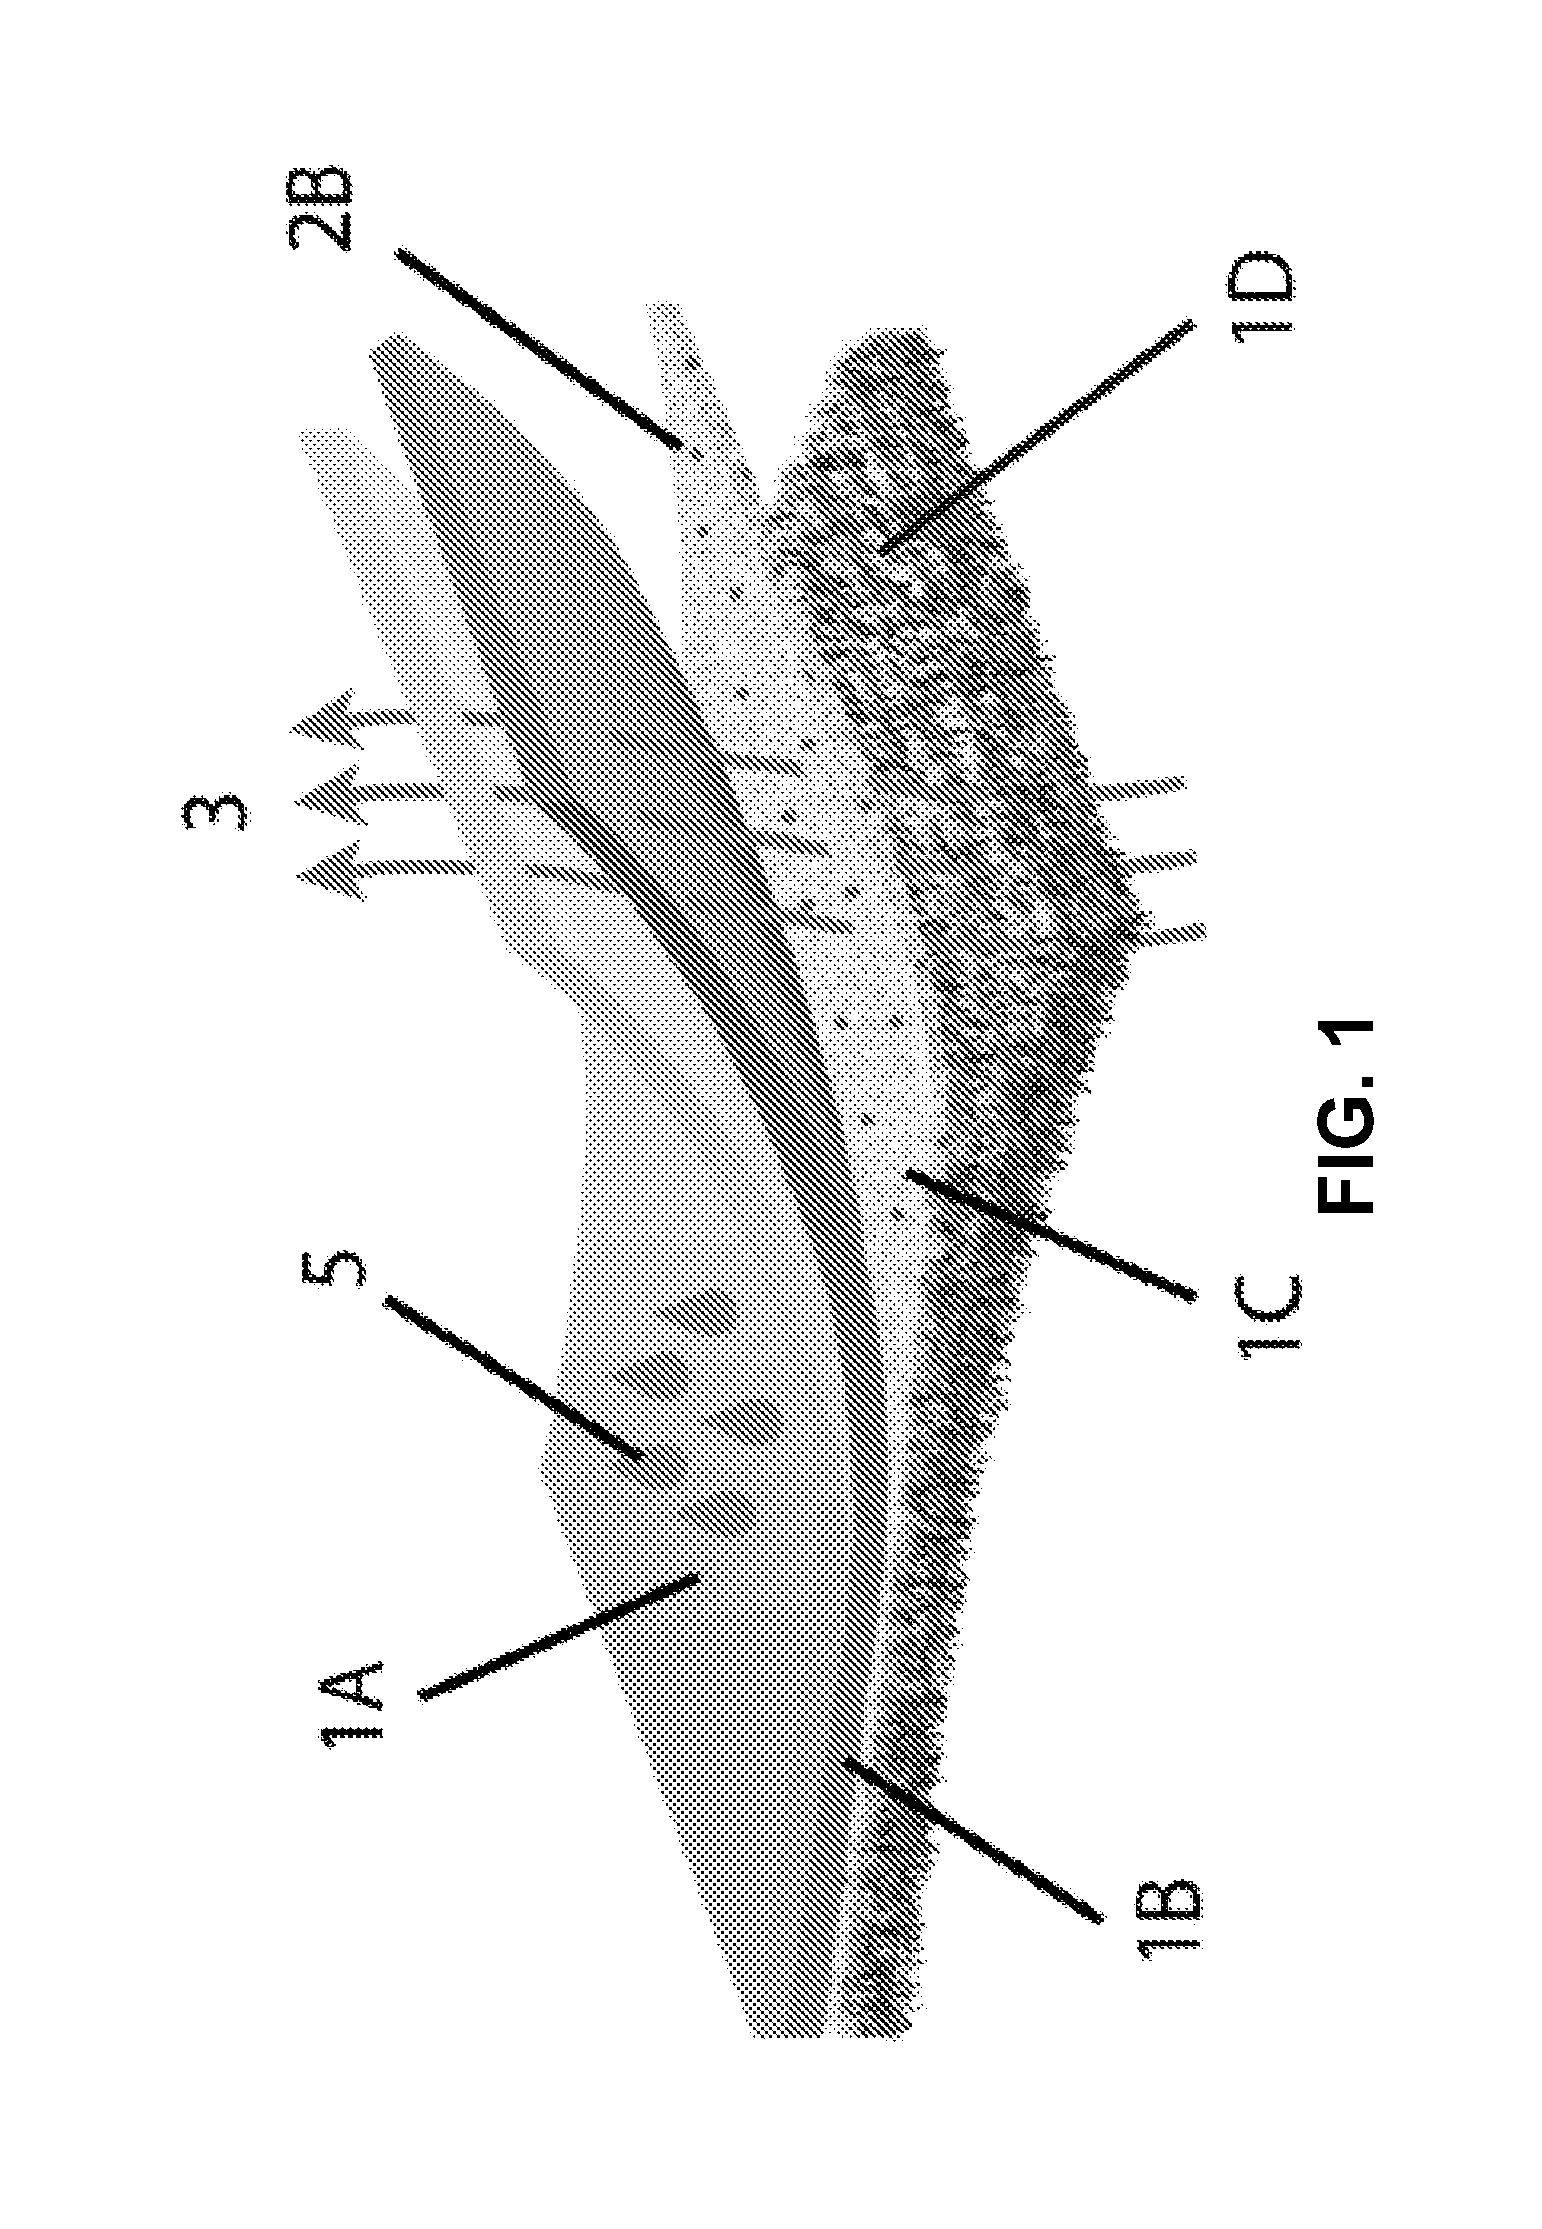 Vapor Permeable Fabric Constructs with Static or Dynamic Antimicrobial Compositions